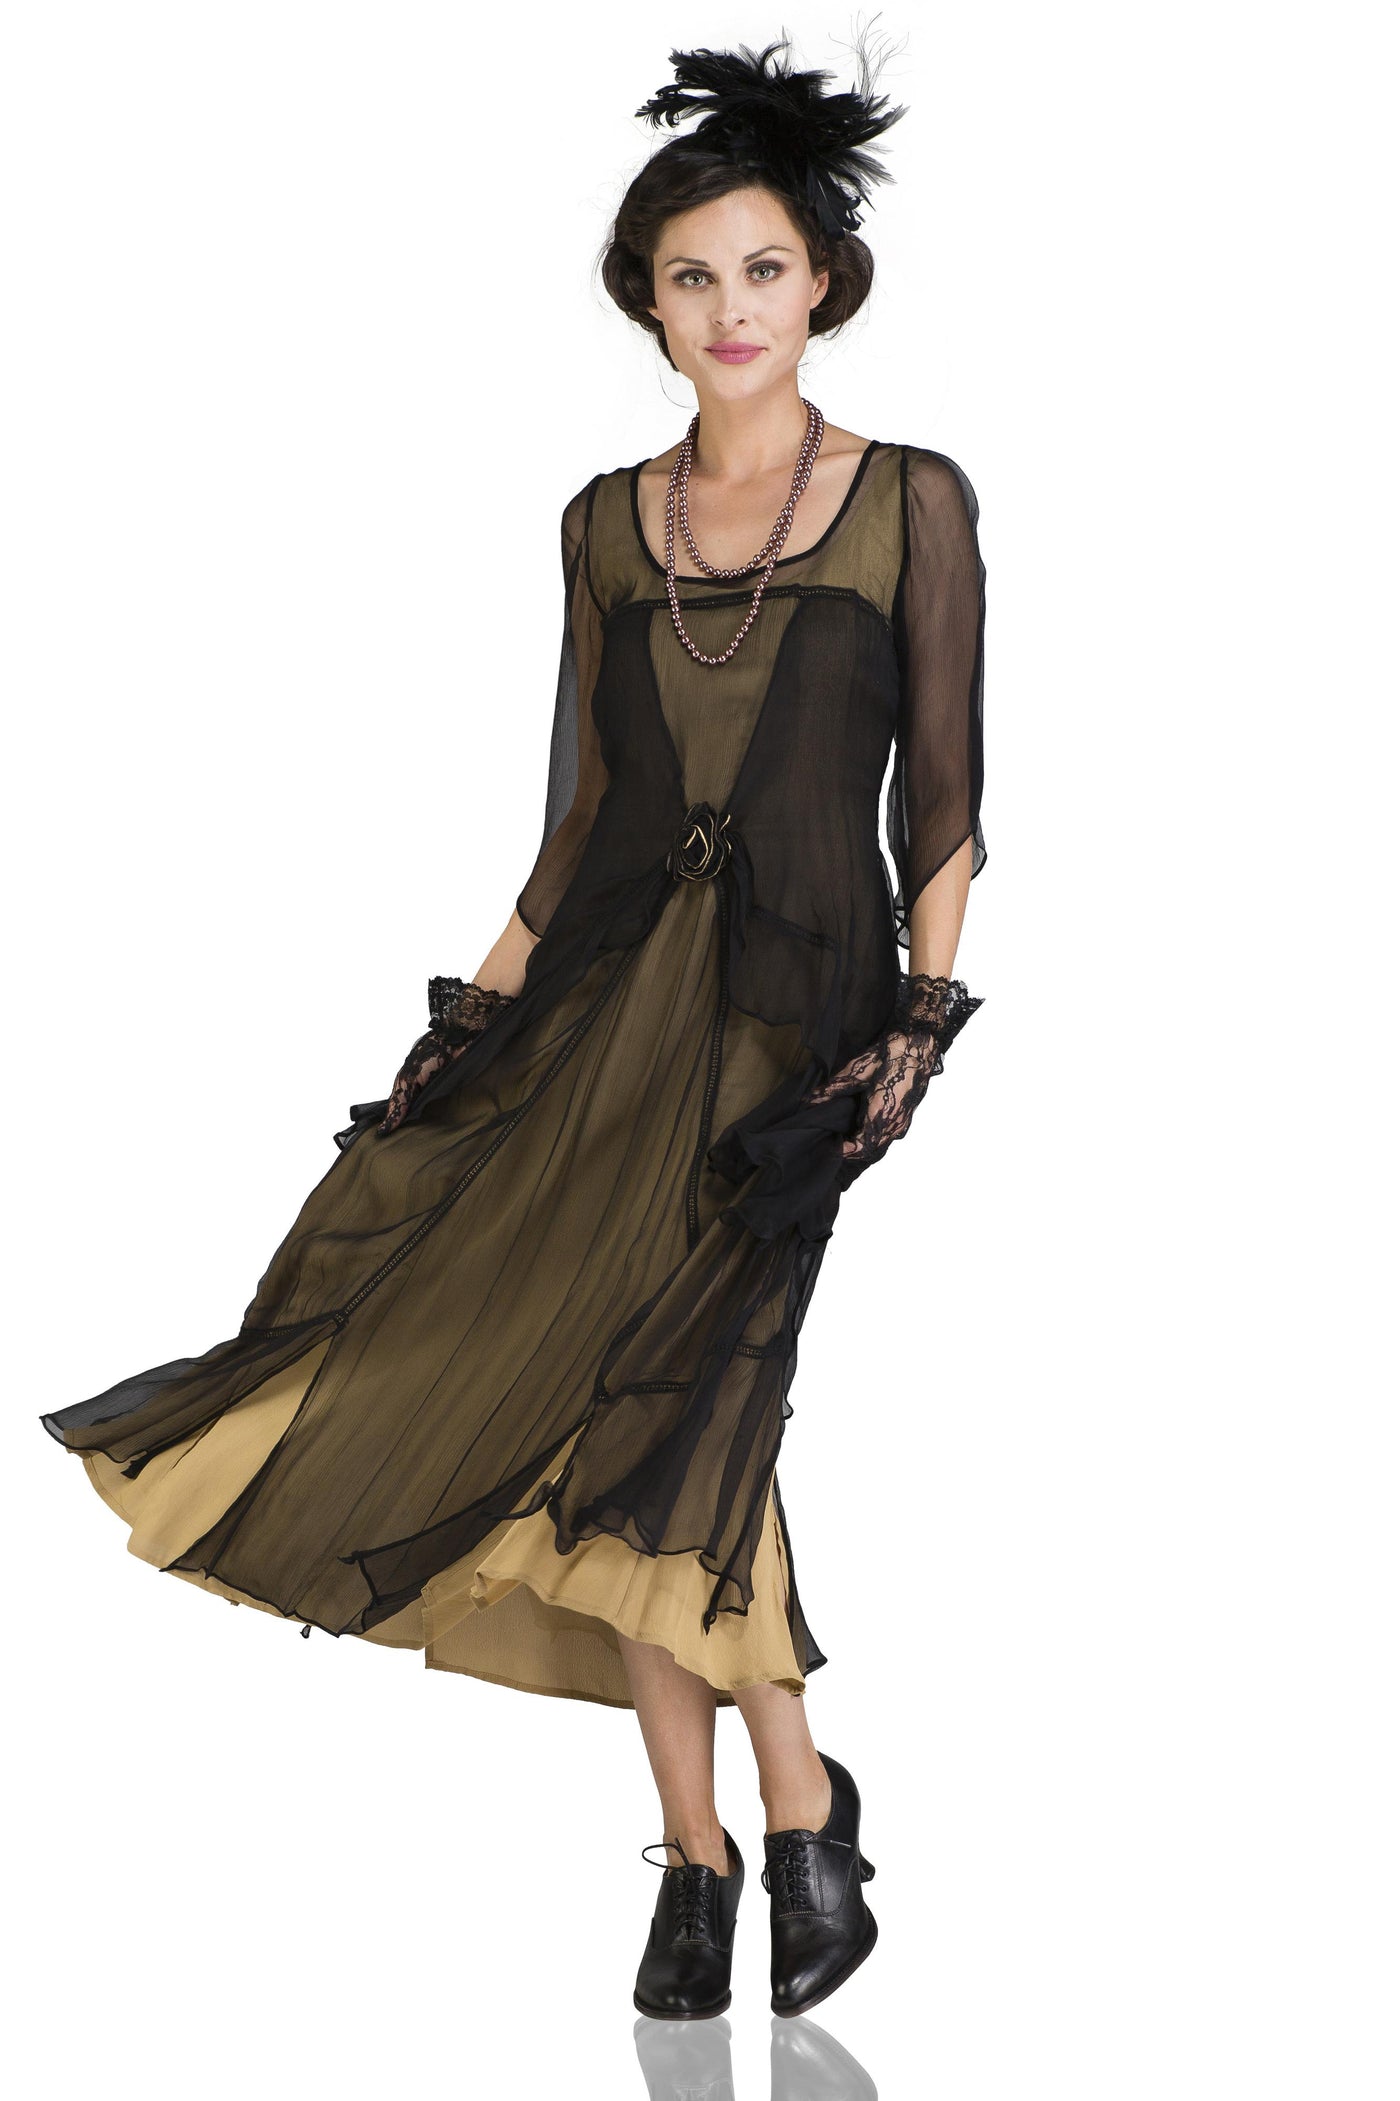 Great Gatsby Party Dress in Black Gold by Nataya - SALE